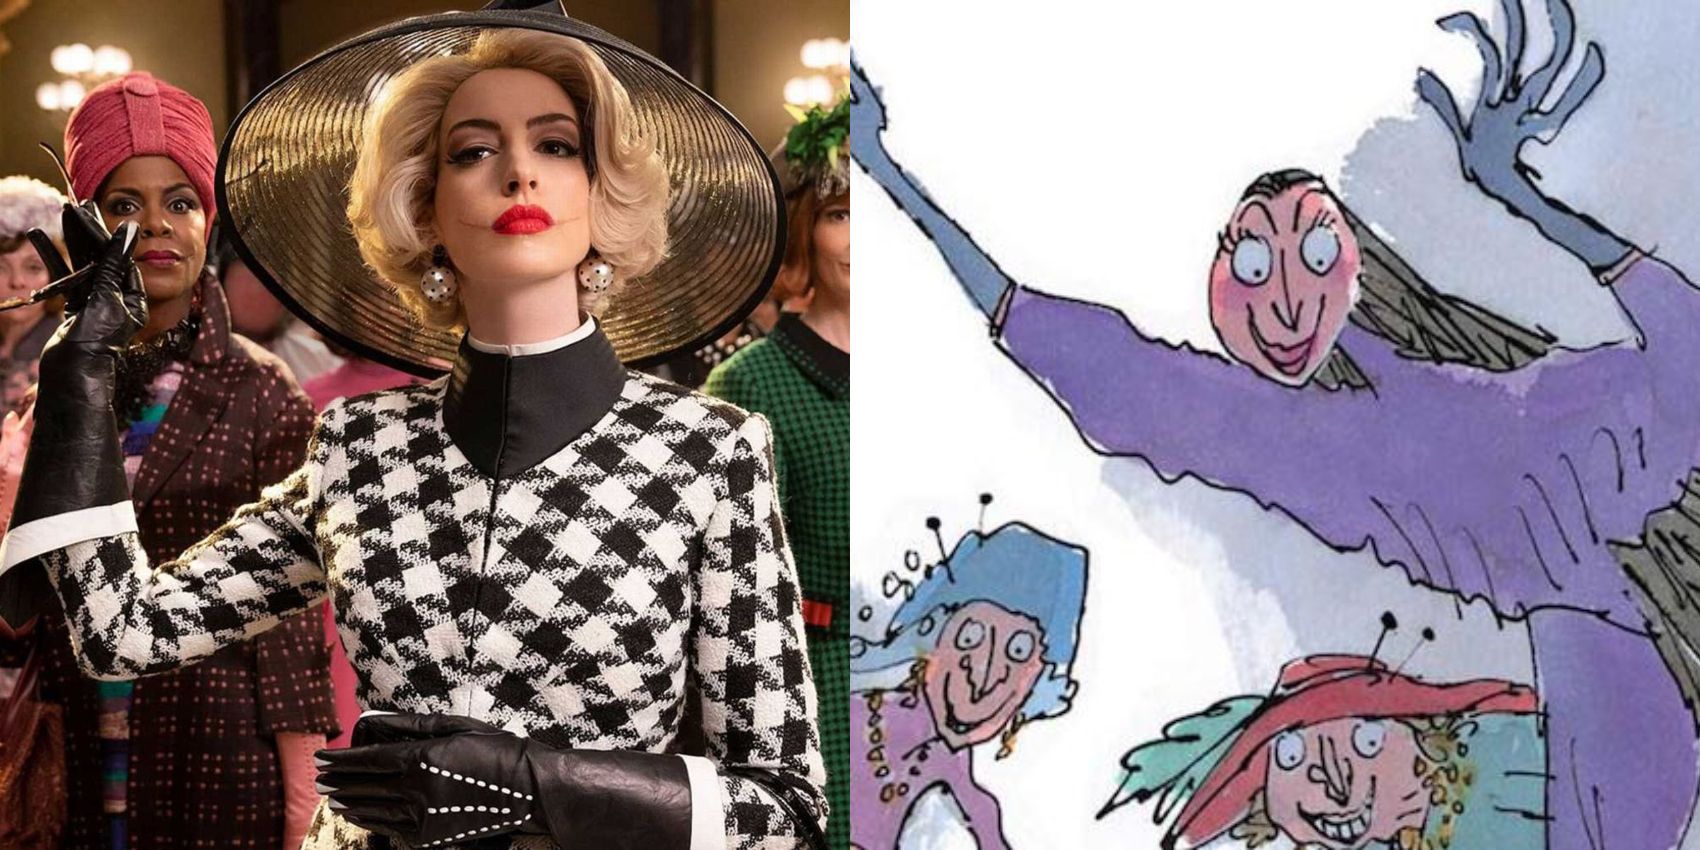 the difference between the portrayal of the witches in the 2020 film and in the illustrations for Dahl's original book